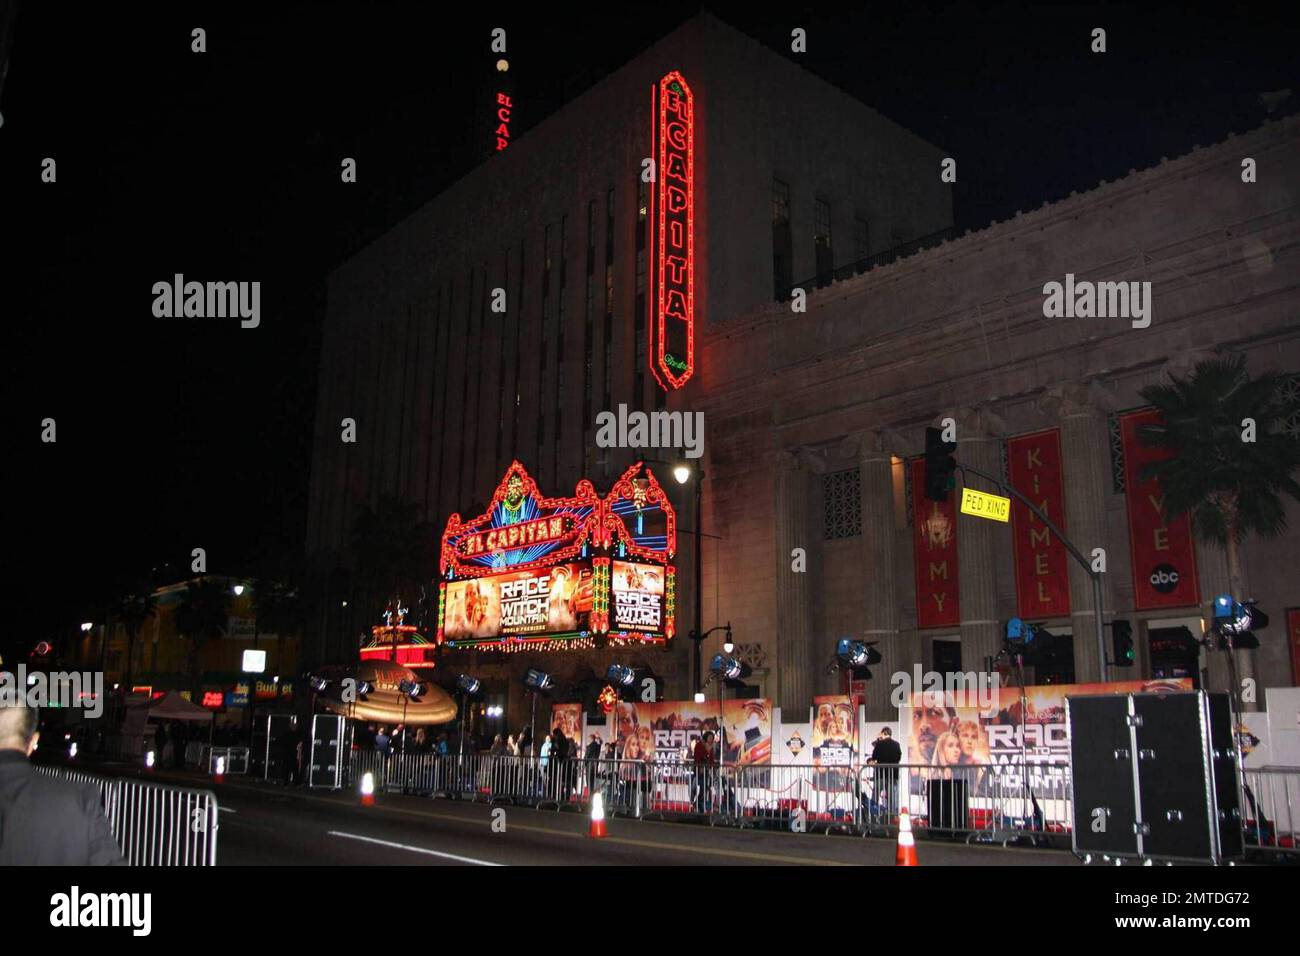 General views of the world premiere of Walt Disney's 'Race To Witch Mountain' at the El Capitan Theatre in Los Angeles, CA. 3/11/09. Stock Photo